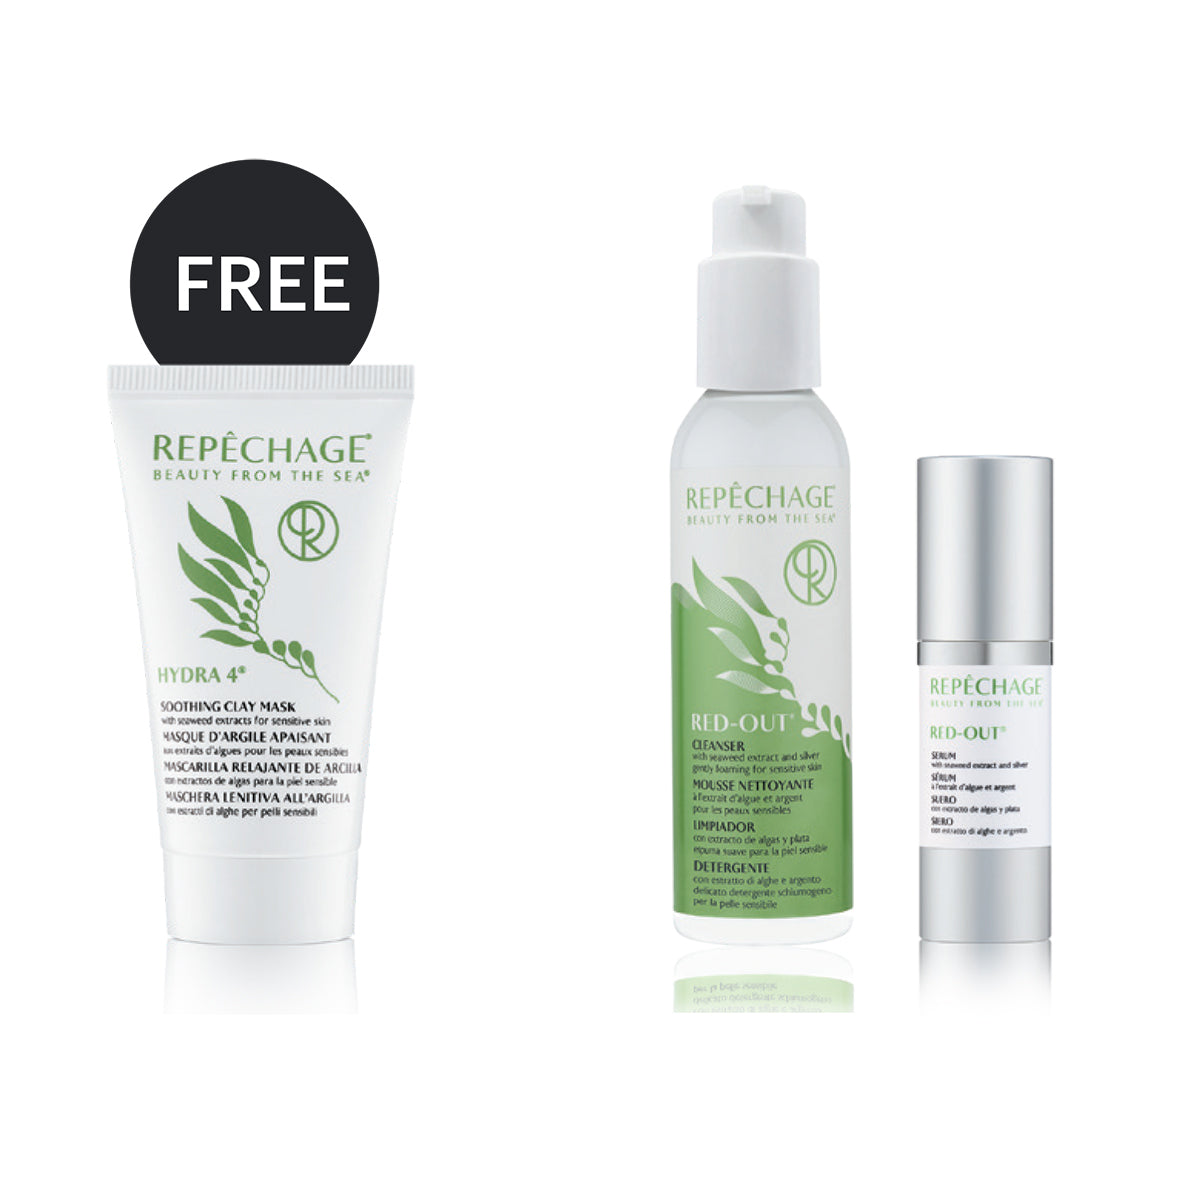 FREE Hydra 4 Soothing Clay Mask With Purchase of Red-Out Cleanser and Red-Out Serum